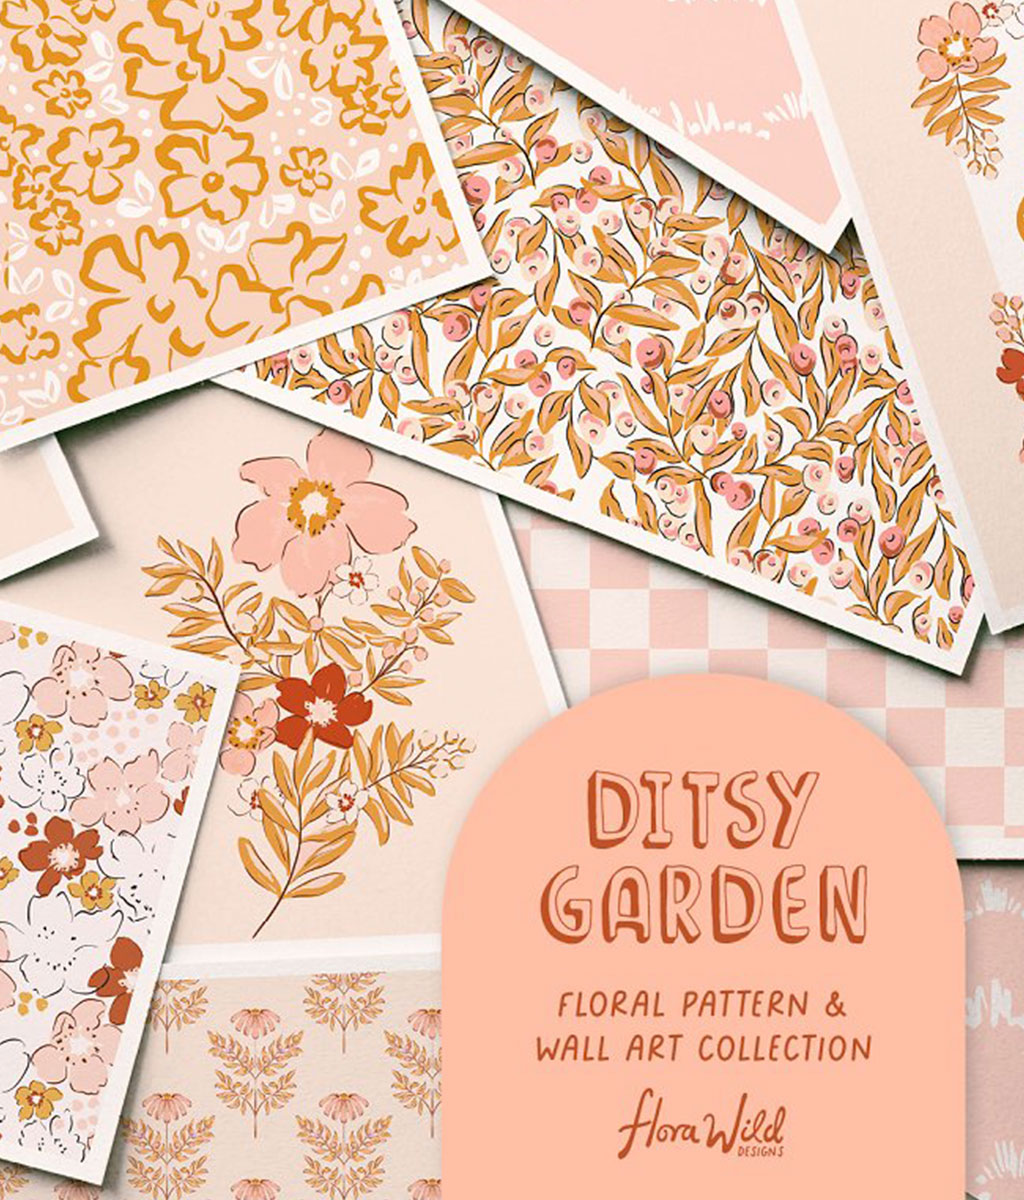 Retro Floral Patterns & Wall Art